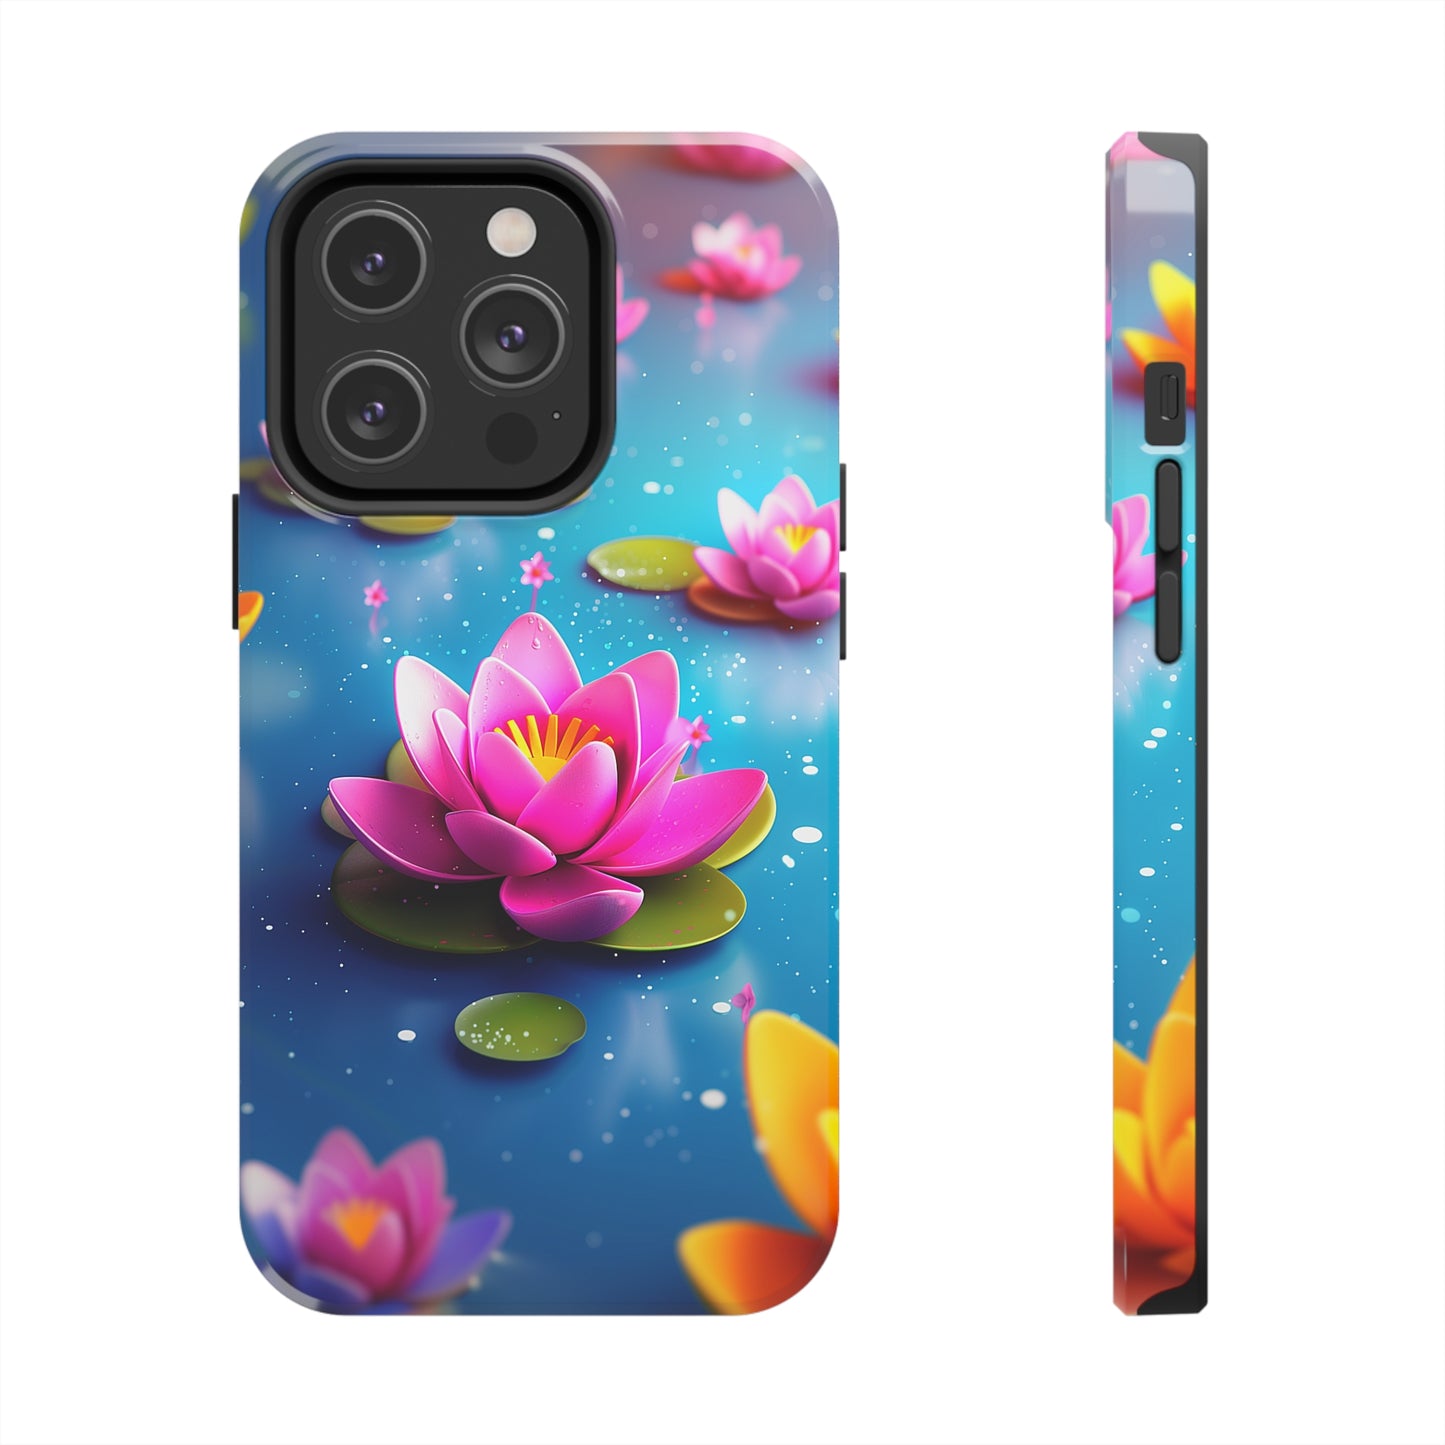 Lotus Lagoon (iPhone Case 11-15)Enhance your iPhone 11-15 with RIMA's Tough Case: Sleek design, double-layer protection, and wireless charging friendly. Perfect for the urban lifestyle.RimaGallery